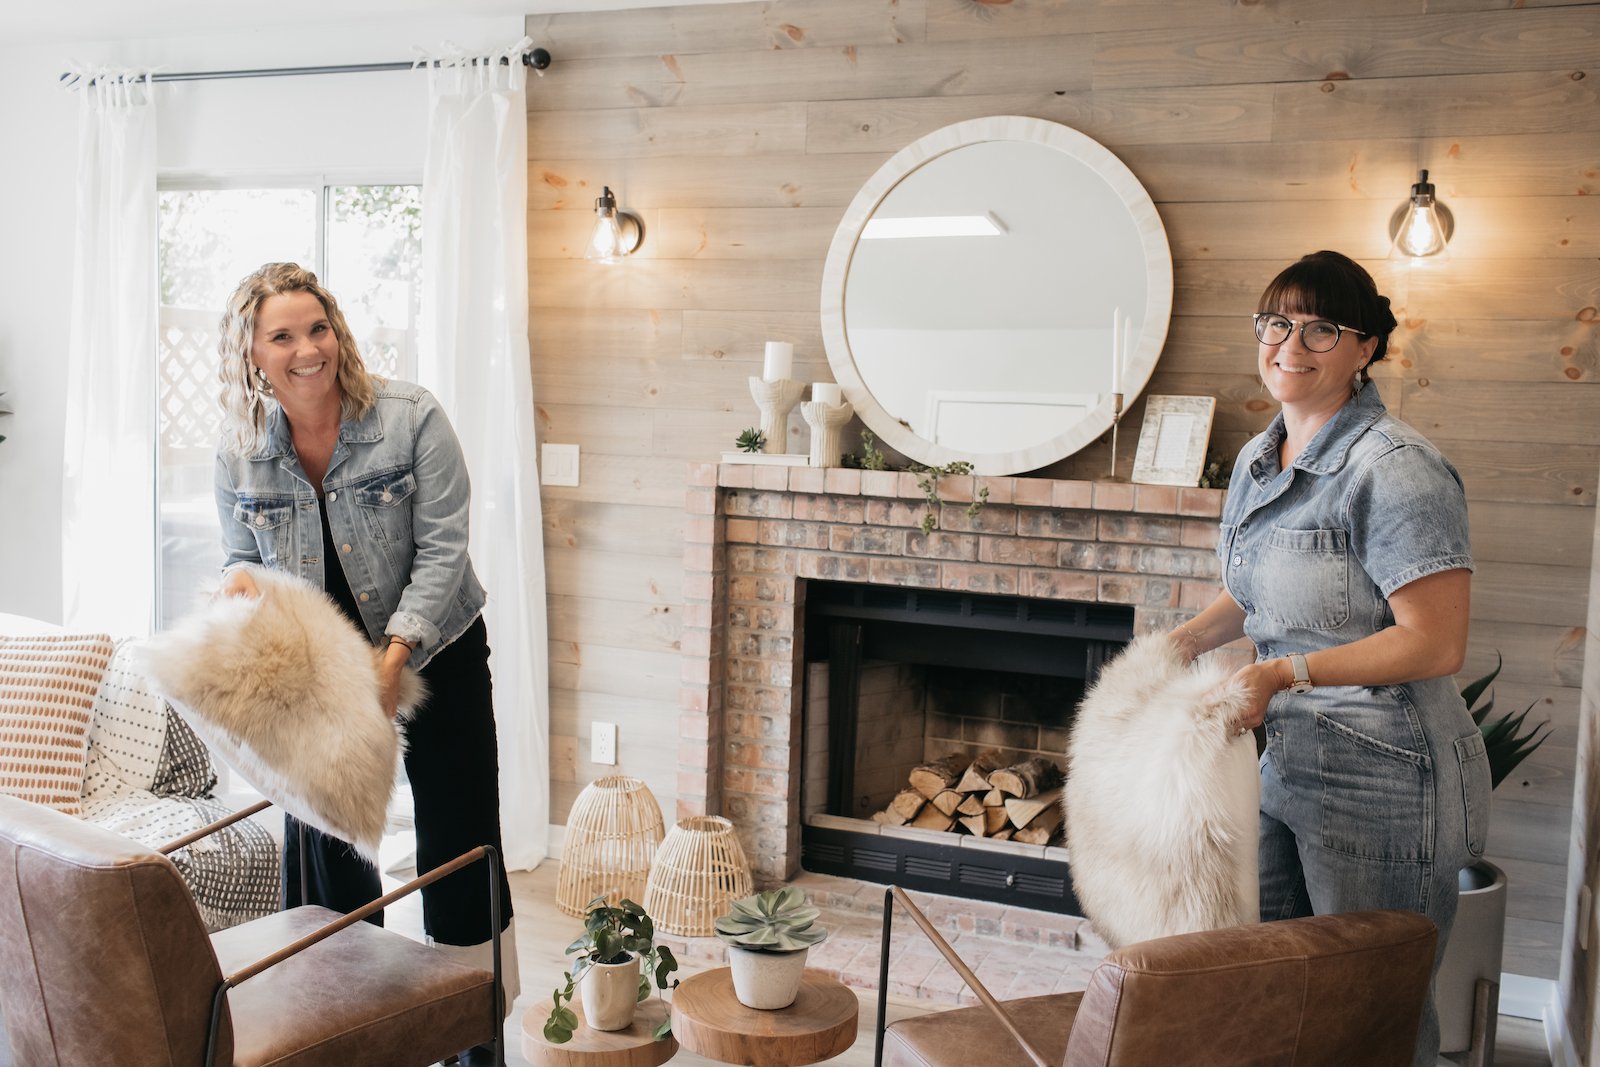 Leslie Davis & Lyndsay Lamb from 'Unsellable Houses' hold furry pillows and smile while staging a house 